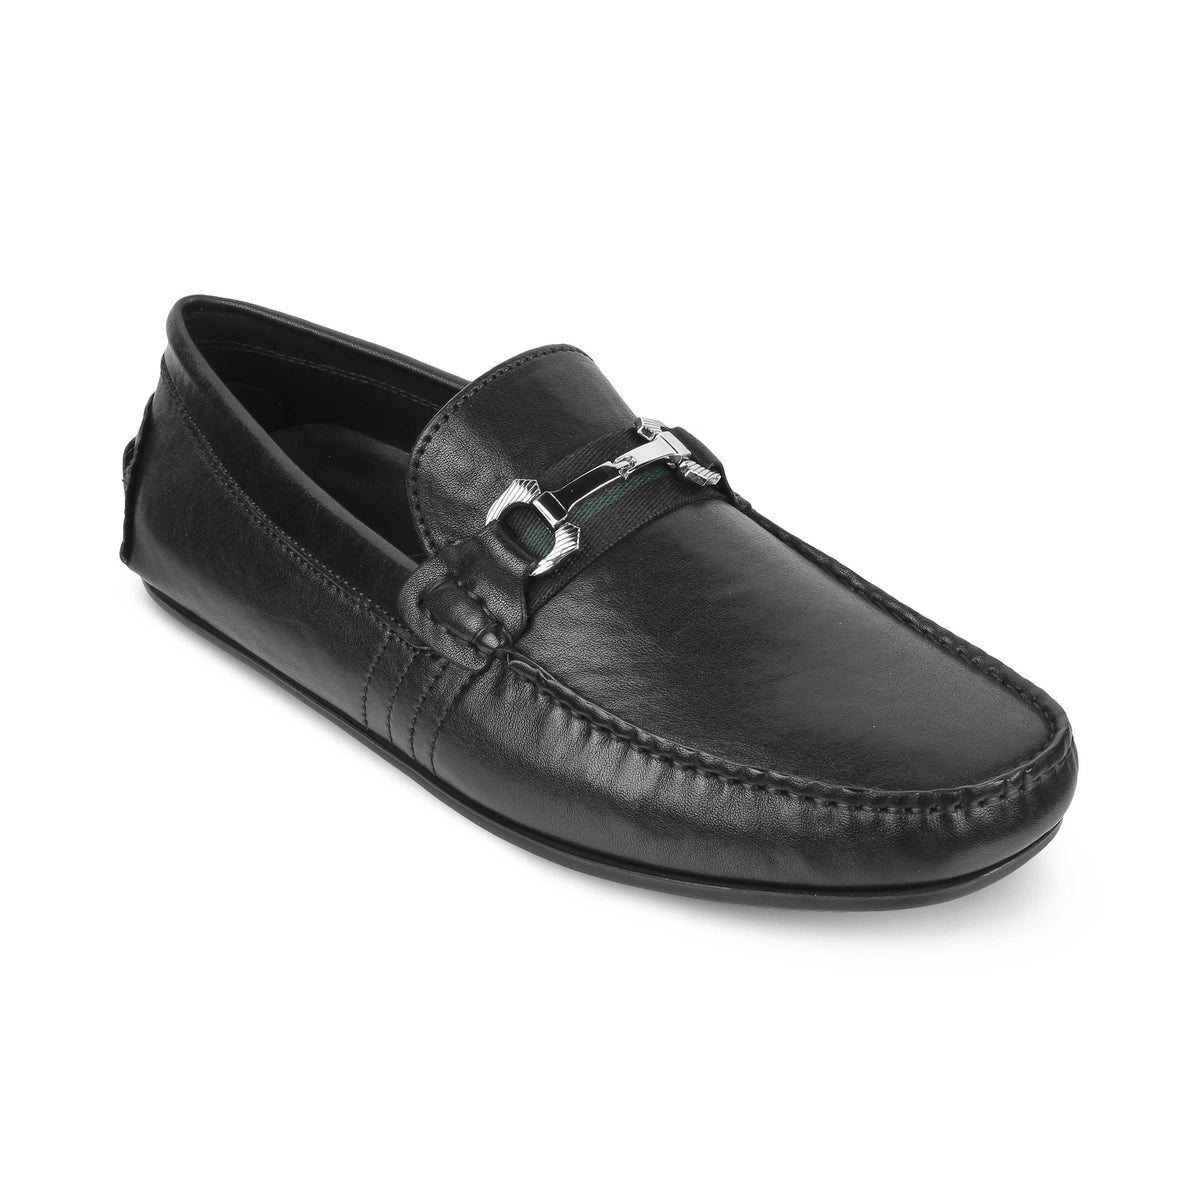 Tresmode Leavre Black Men's Leather Driving Loafers - Tresmode